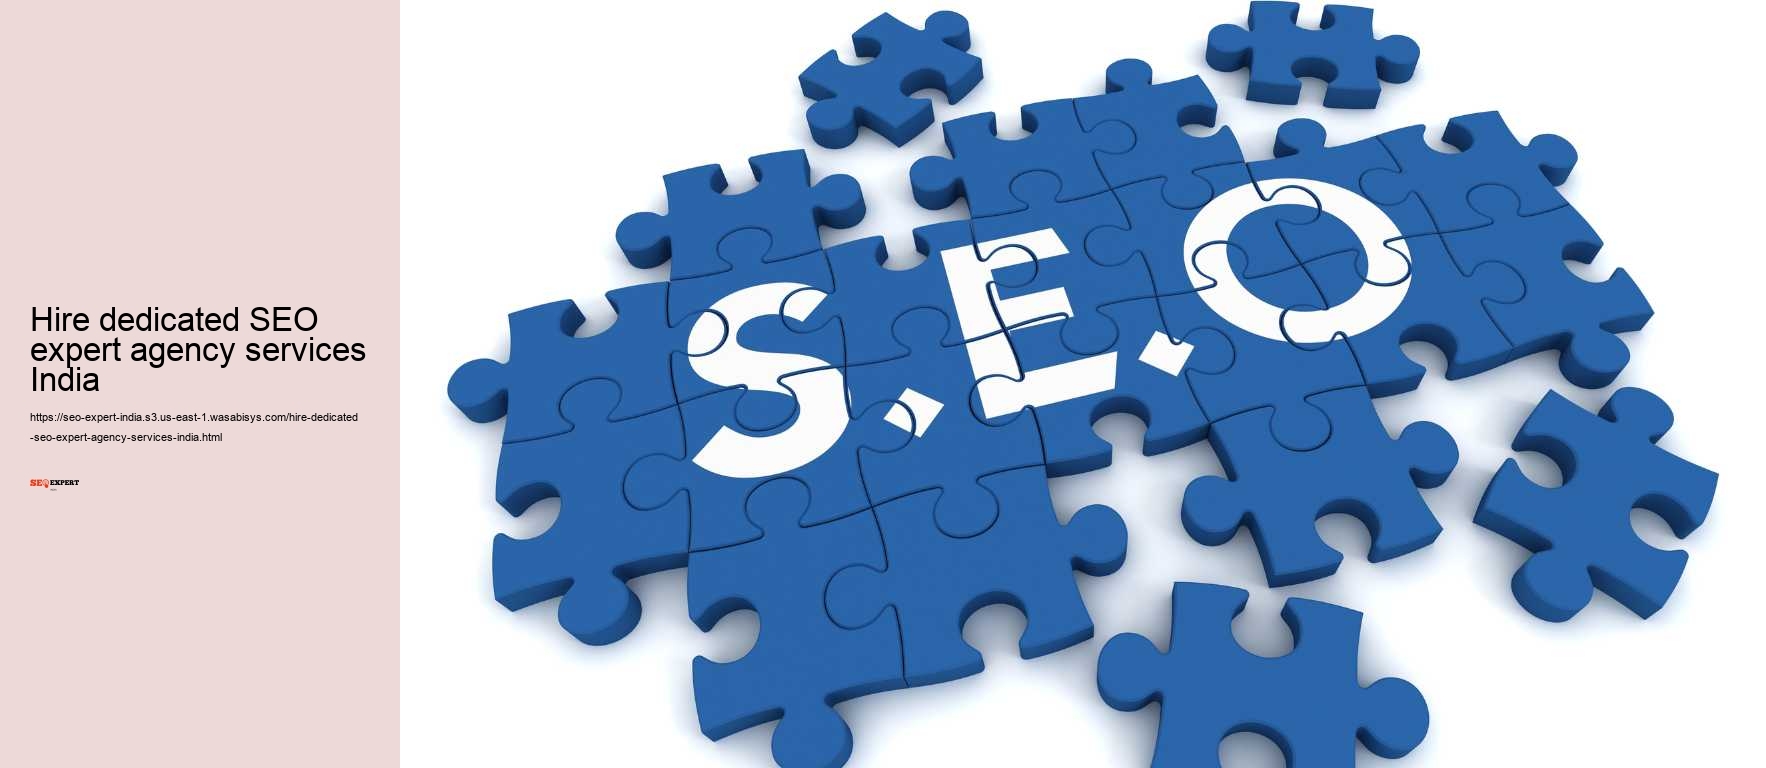 Hire dedicated SEO expert agency services India